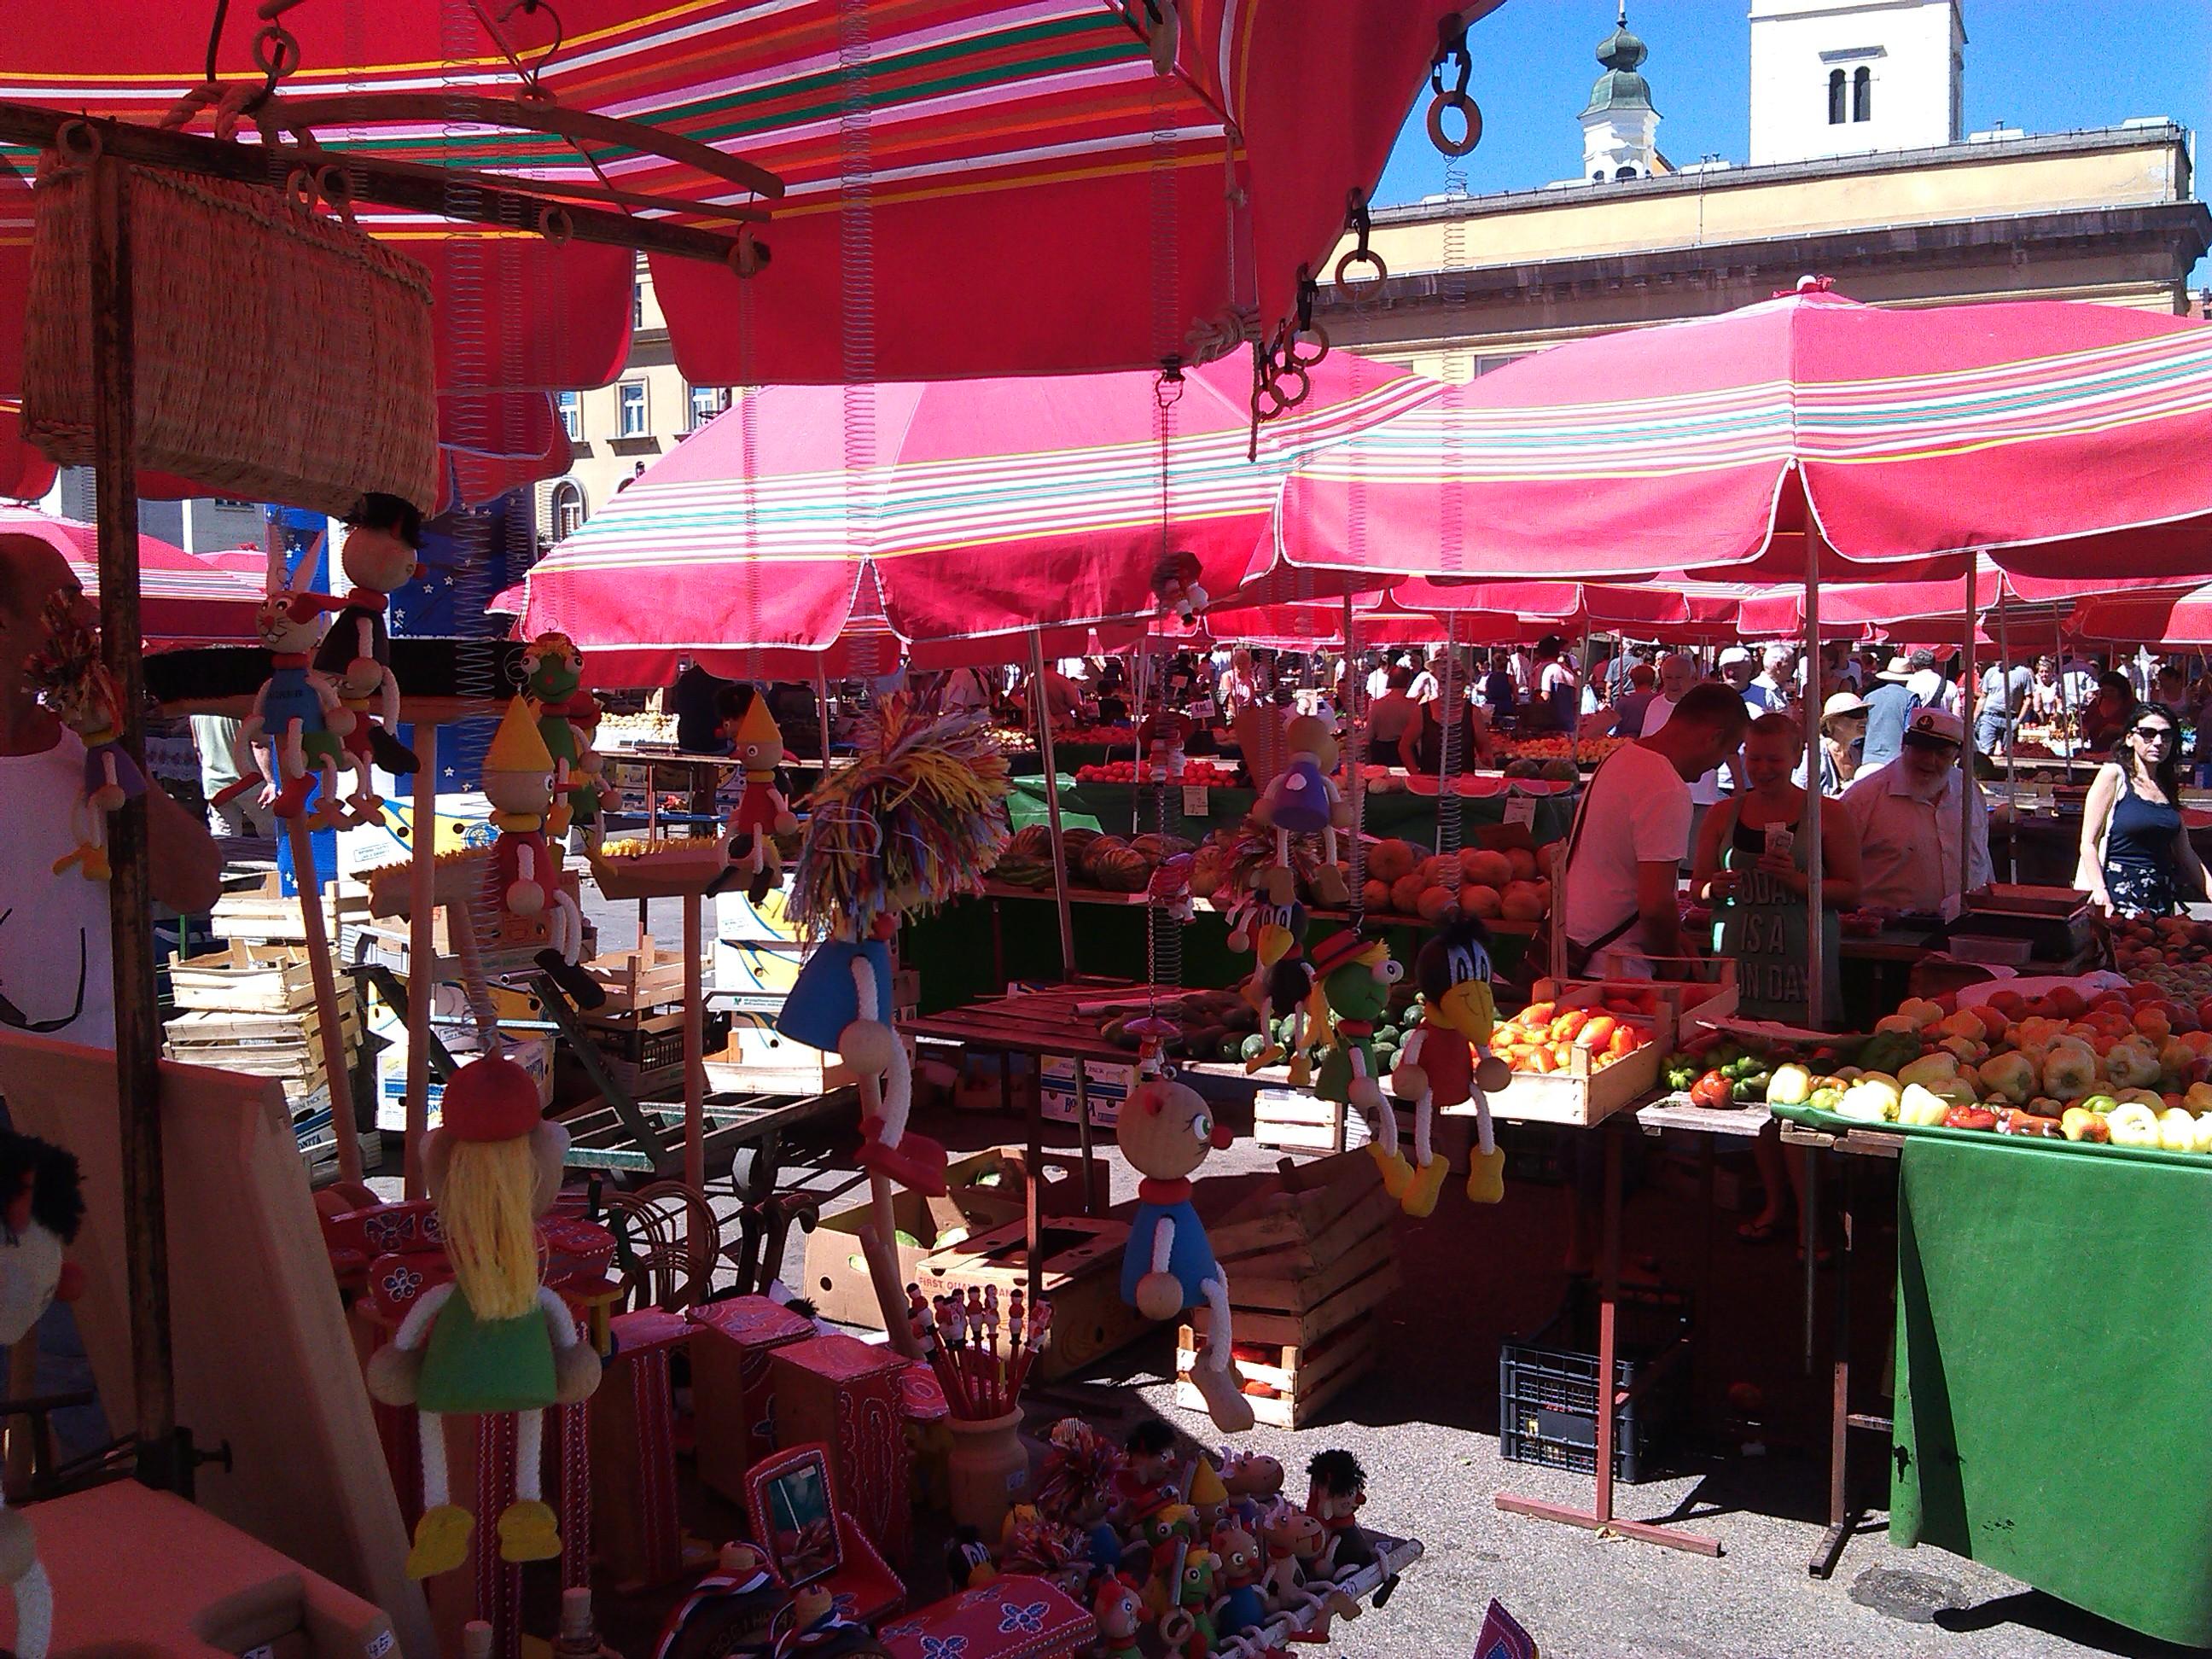 Cover image of this place Dolac market